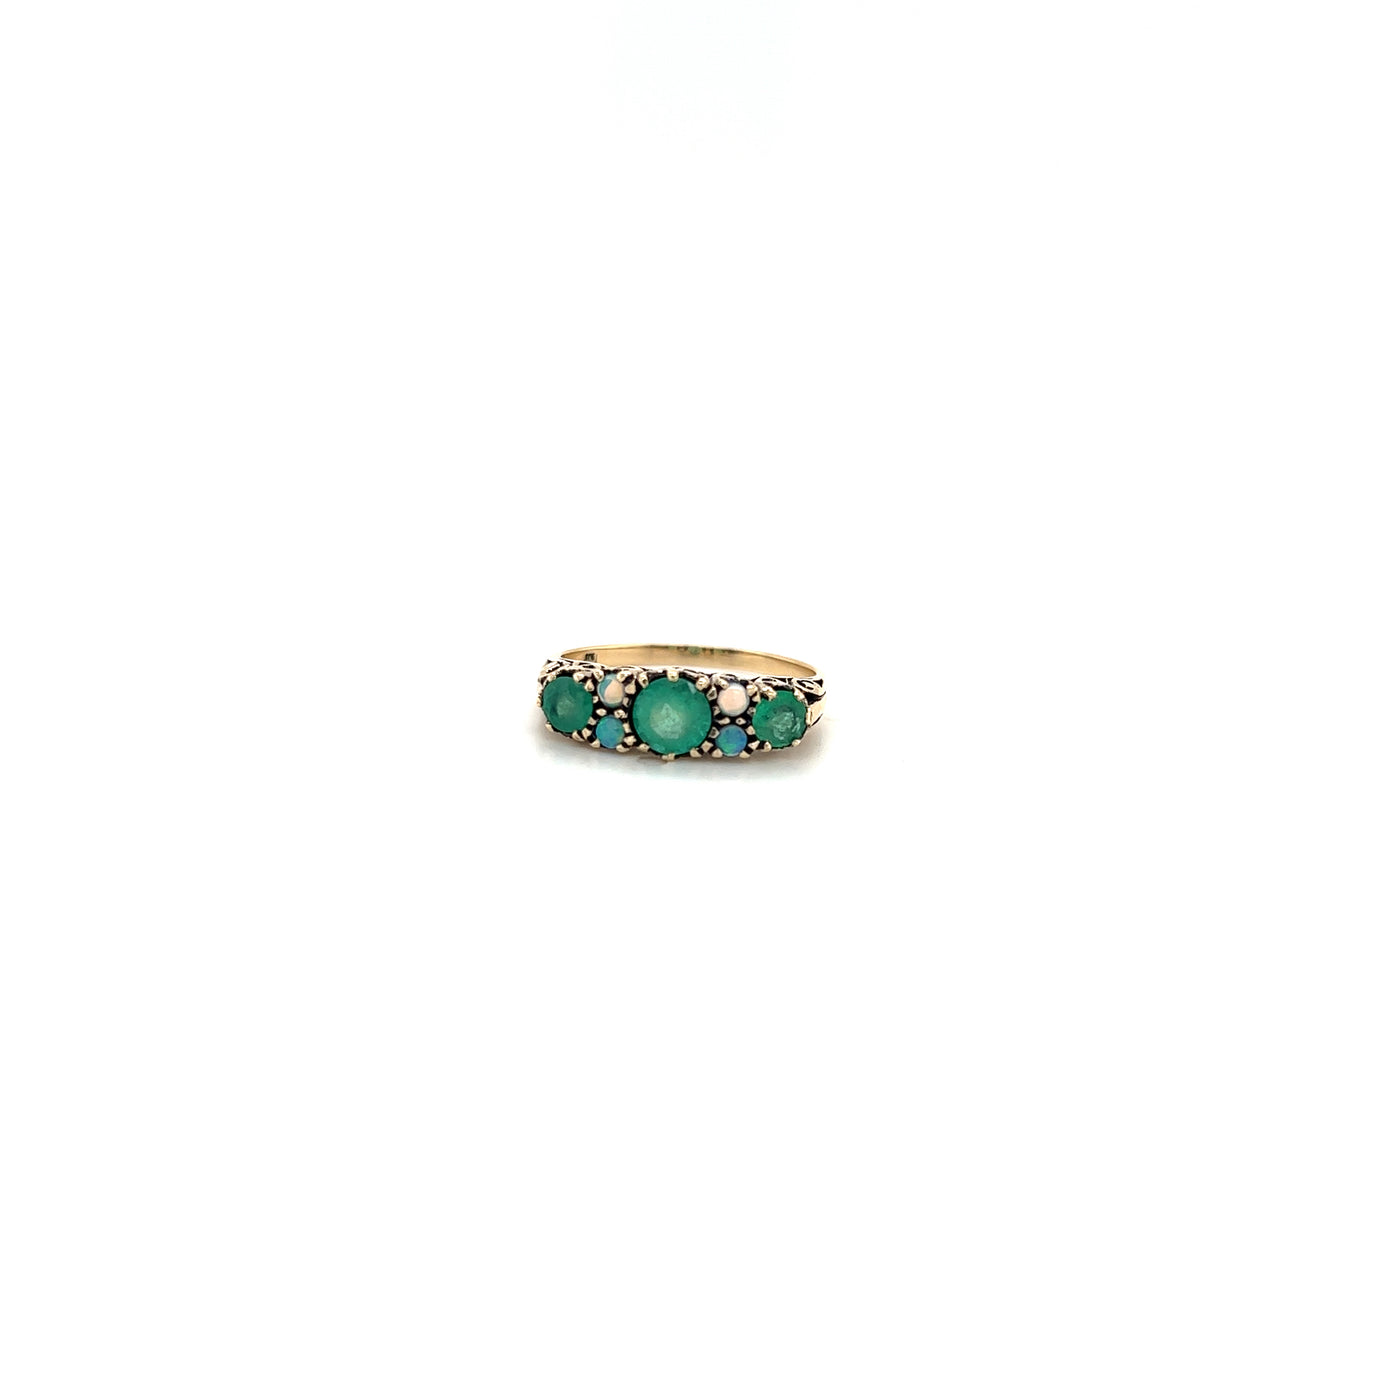 9 Carat yellow gold ring with emerald and opal.